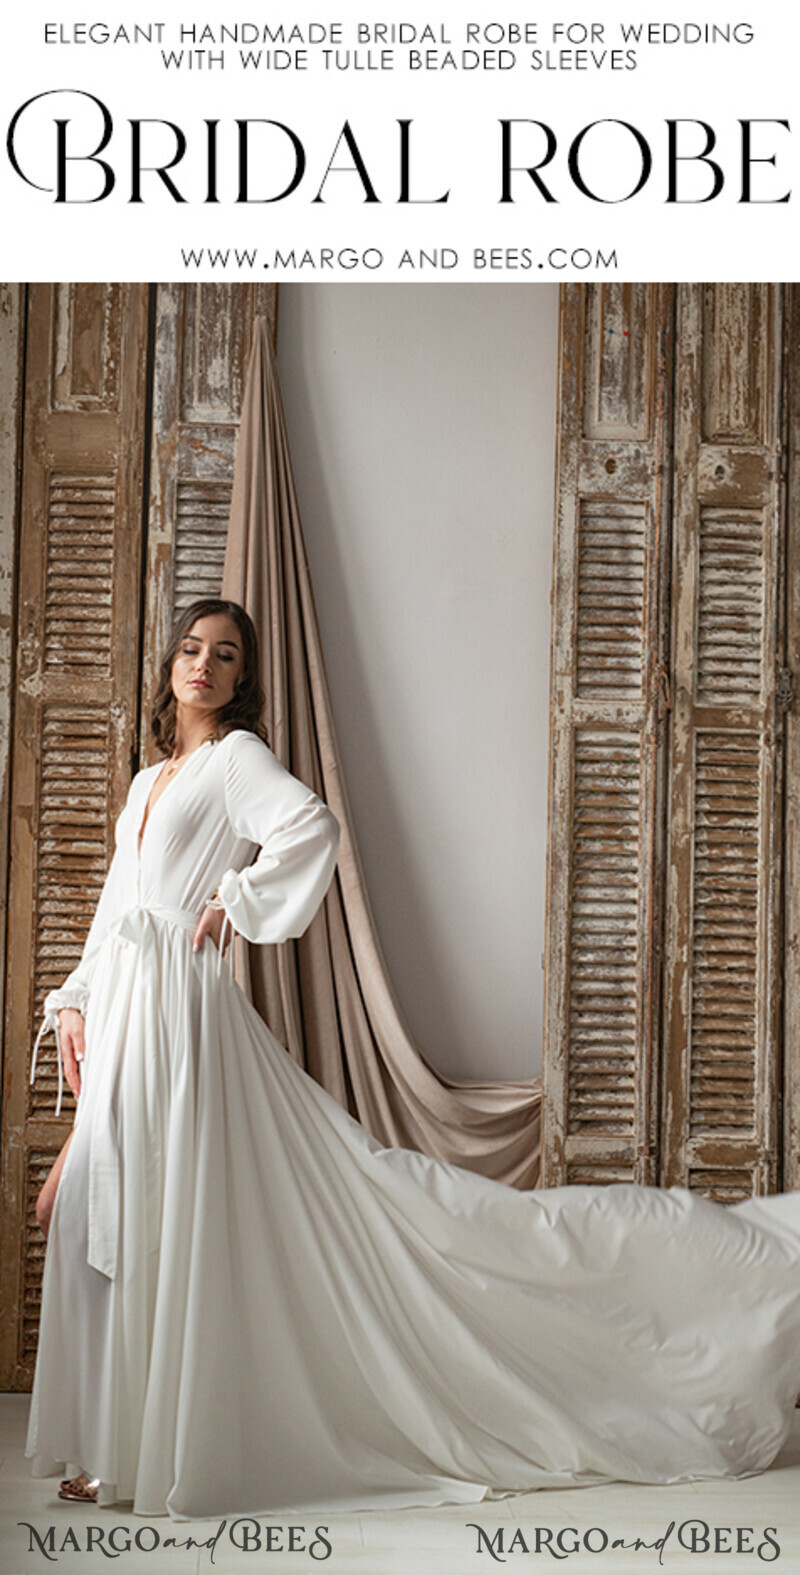 Long Bridal robe for wedding with Train, Robe wide sleeves, Silk Bride robe Long white robe silky boudoir robe Dressing gown Bridesmaid gift-6